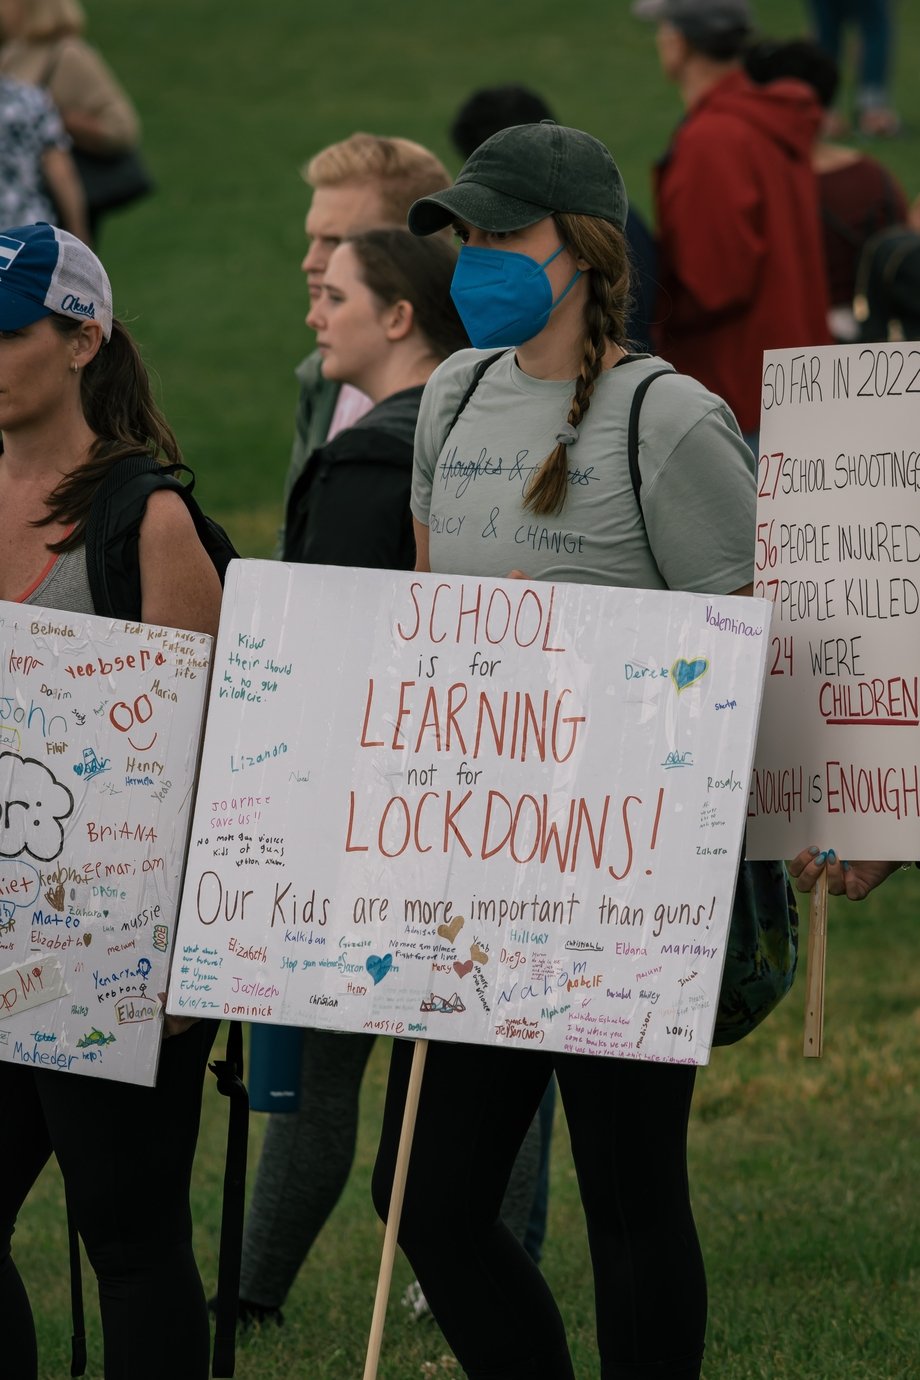 Gun control protestor holding a sign that says "School is for learning, not lockdowns"